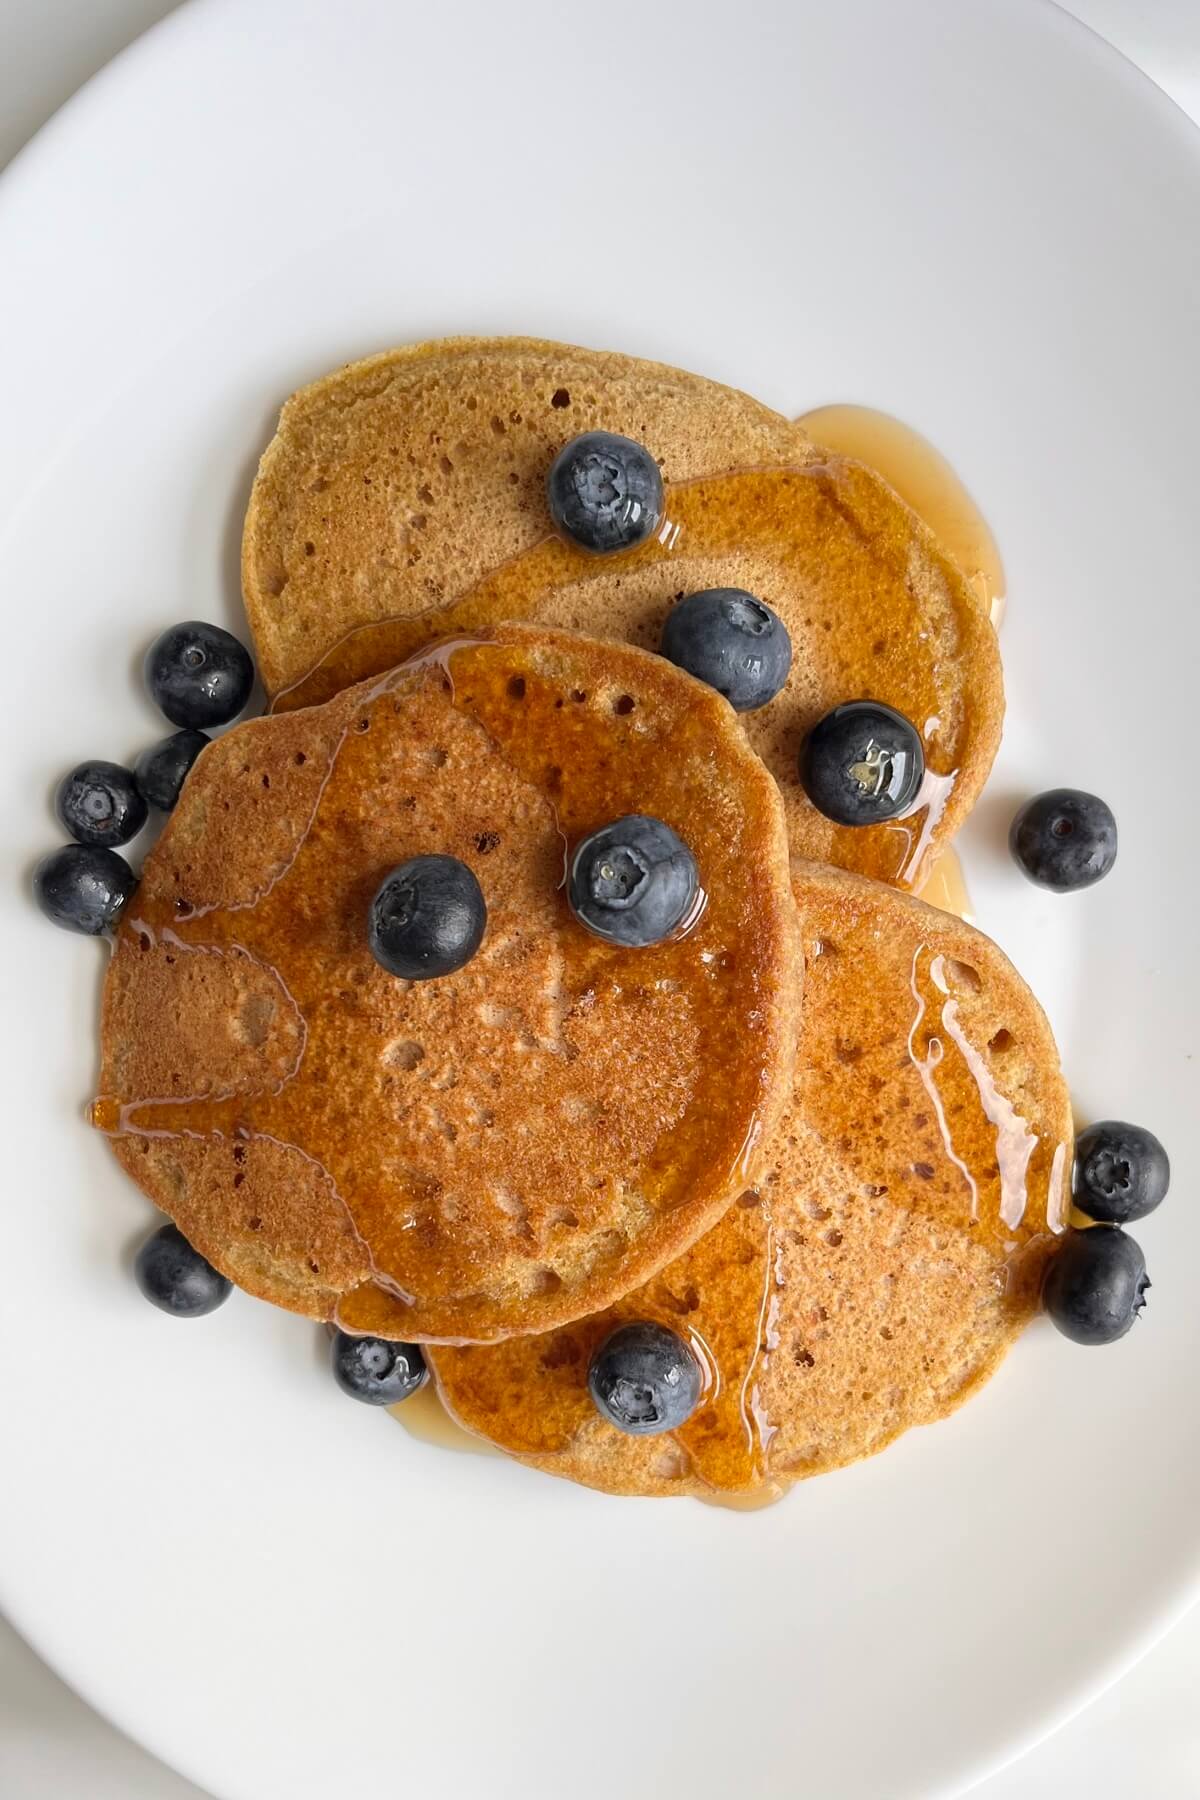 Three pancakes on a white plate with blueberries and syrup.